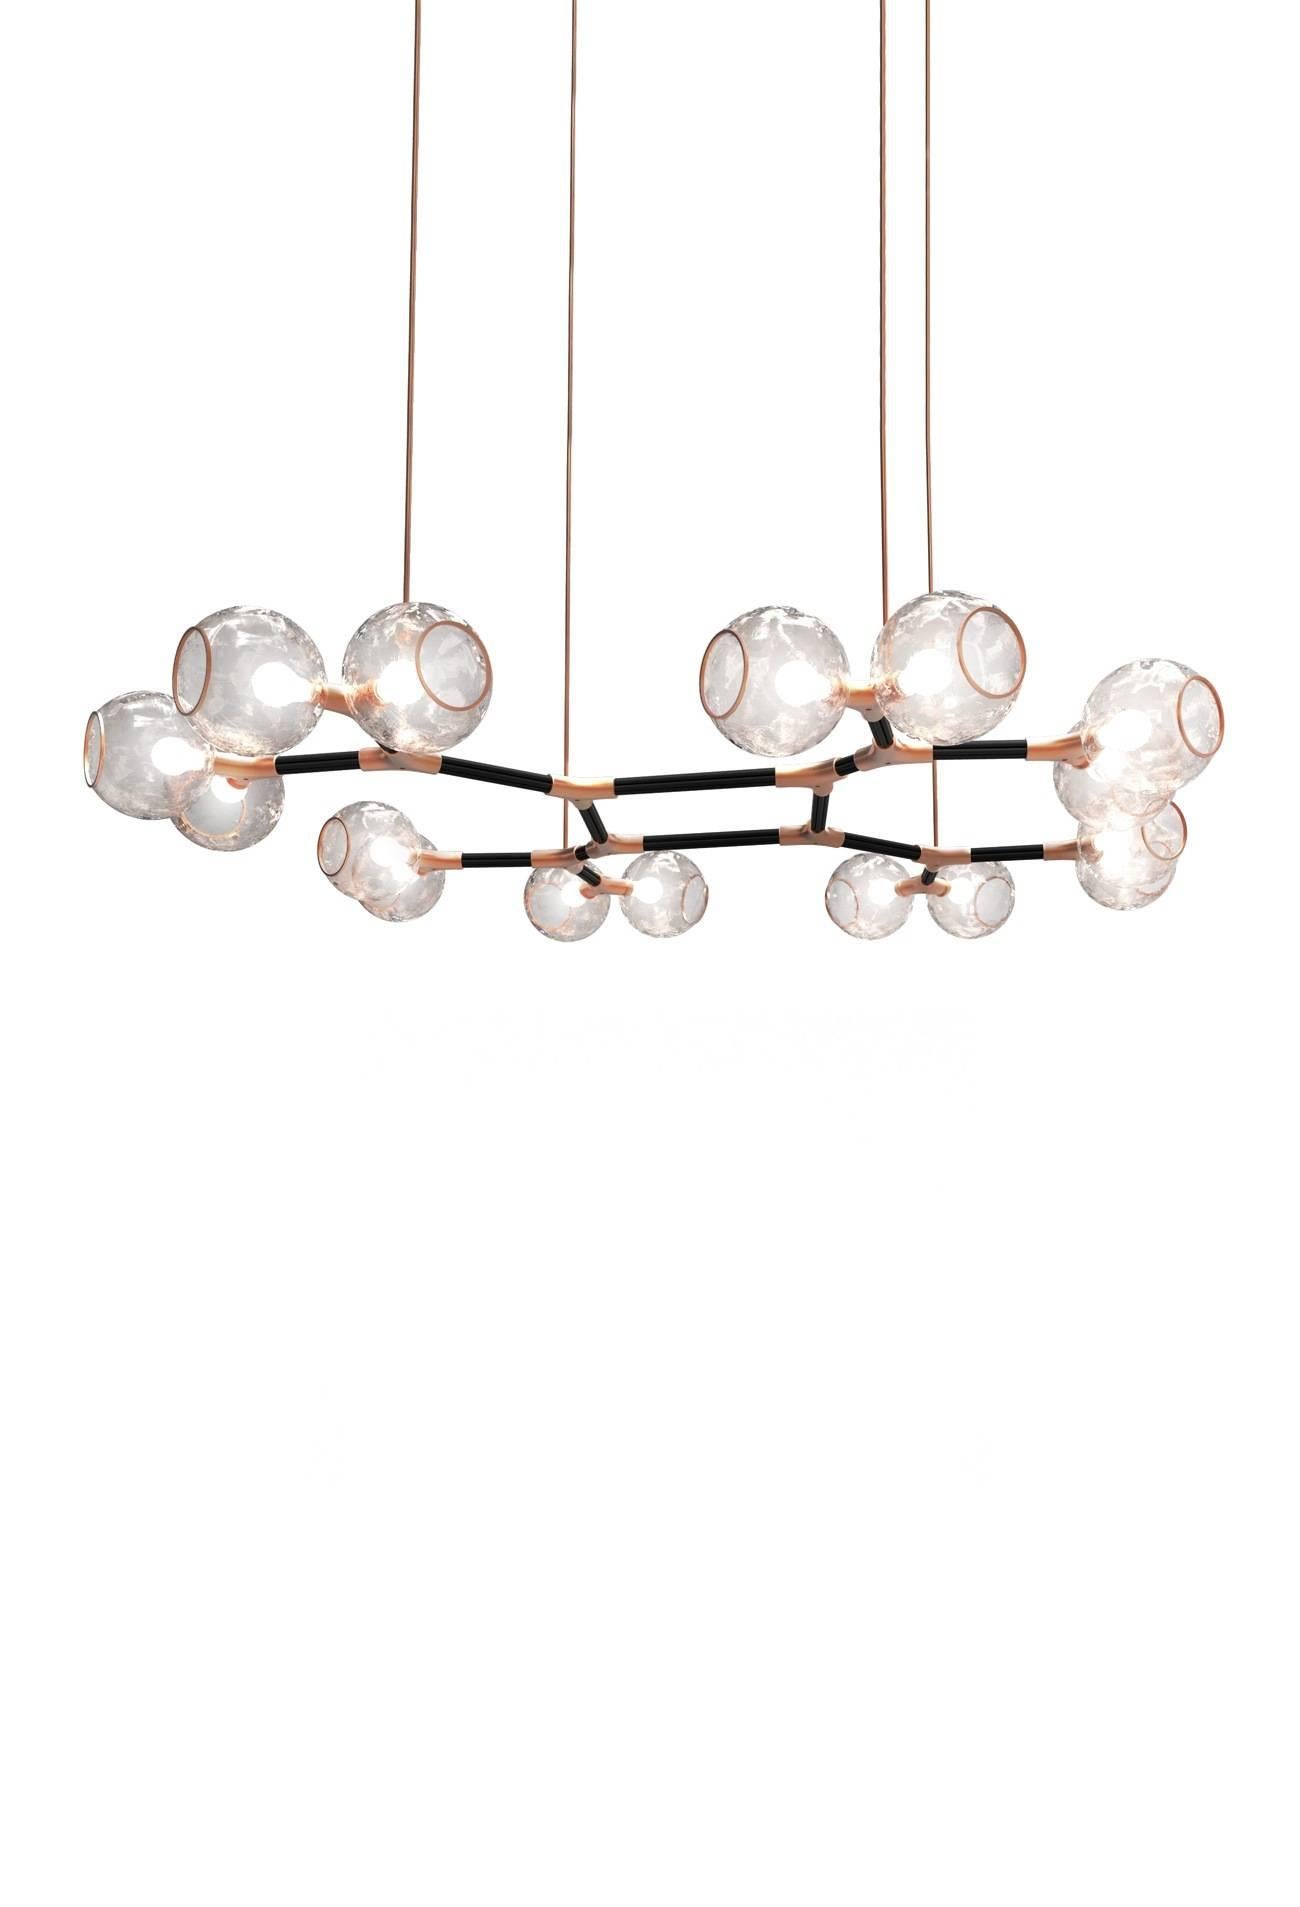 Huge European Modern Brass and Lacquered Horus Chandelier by Brabbu For Sale 2